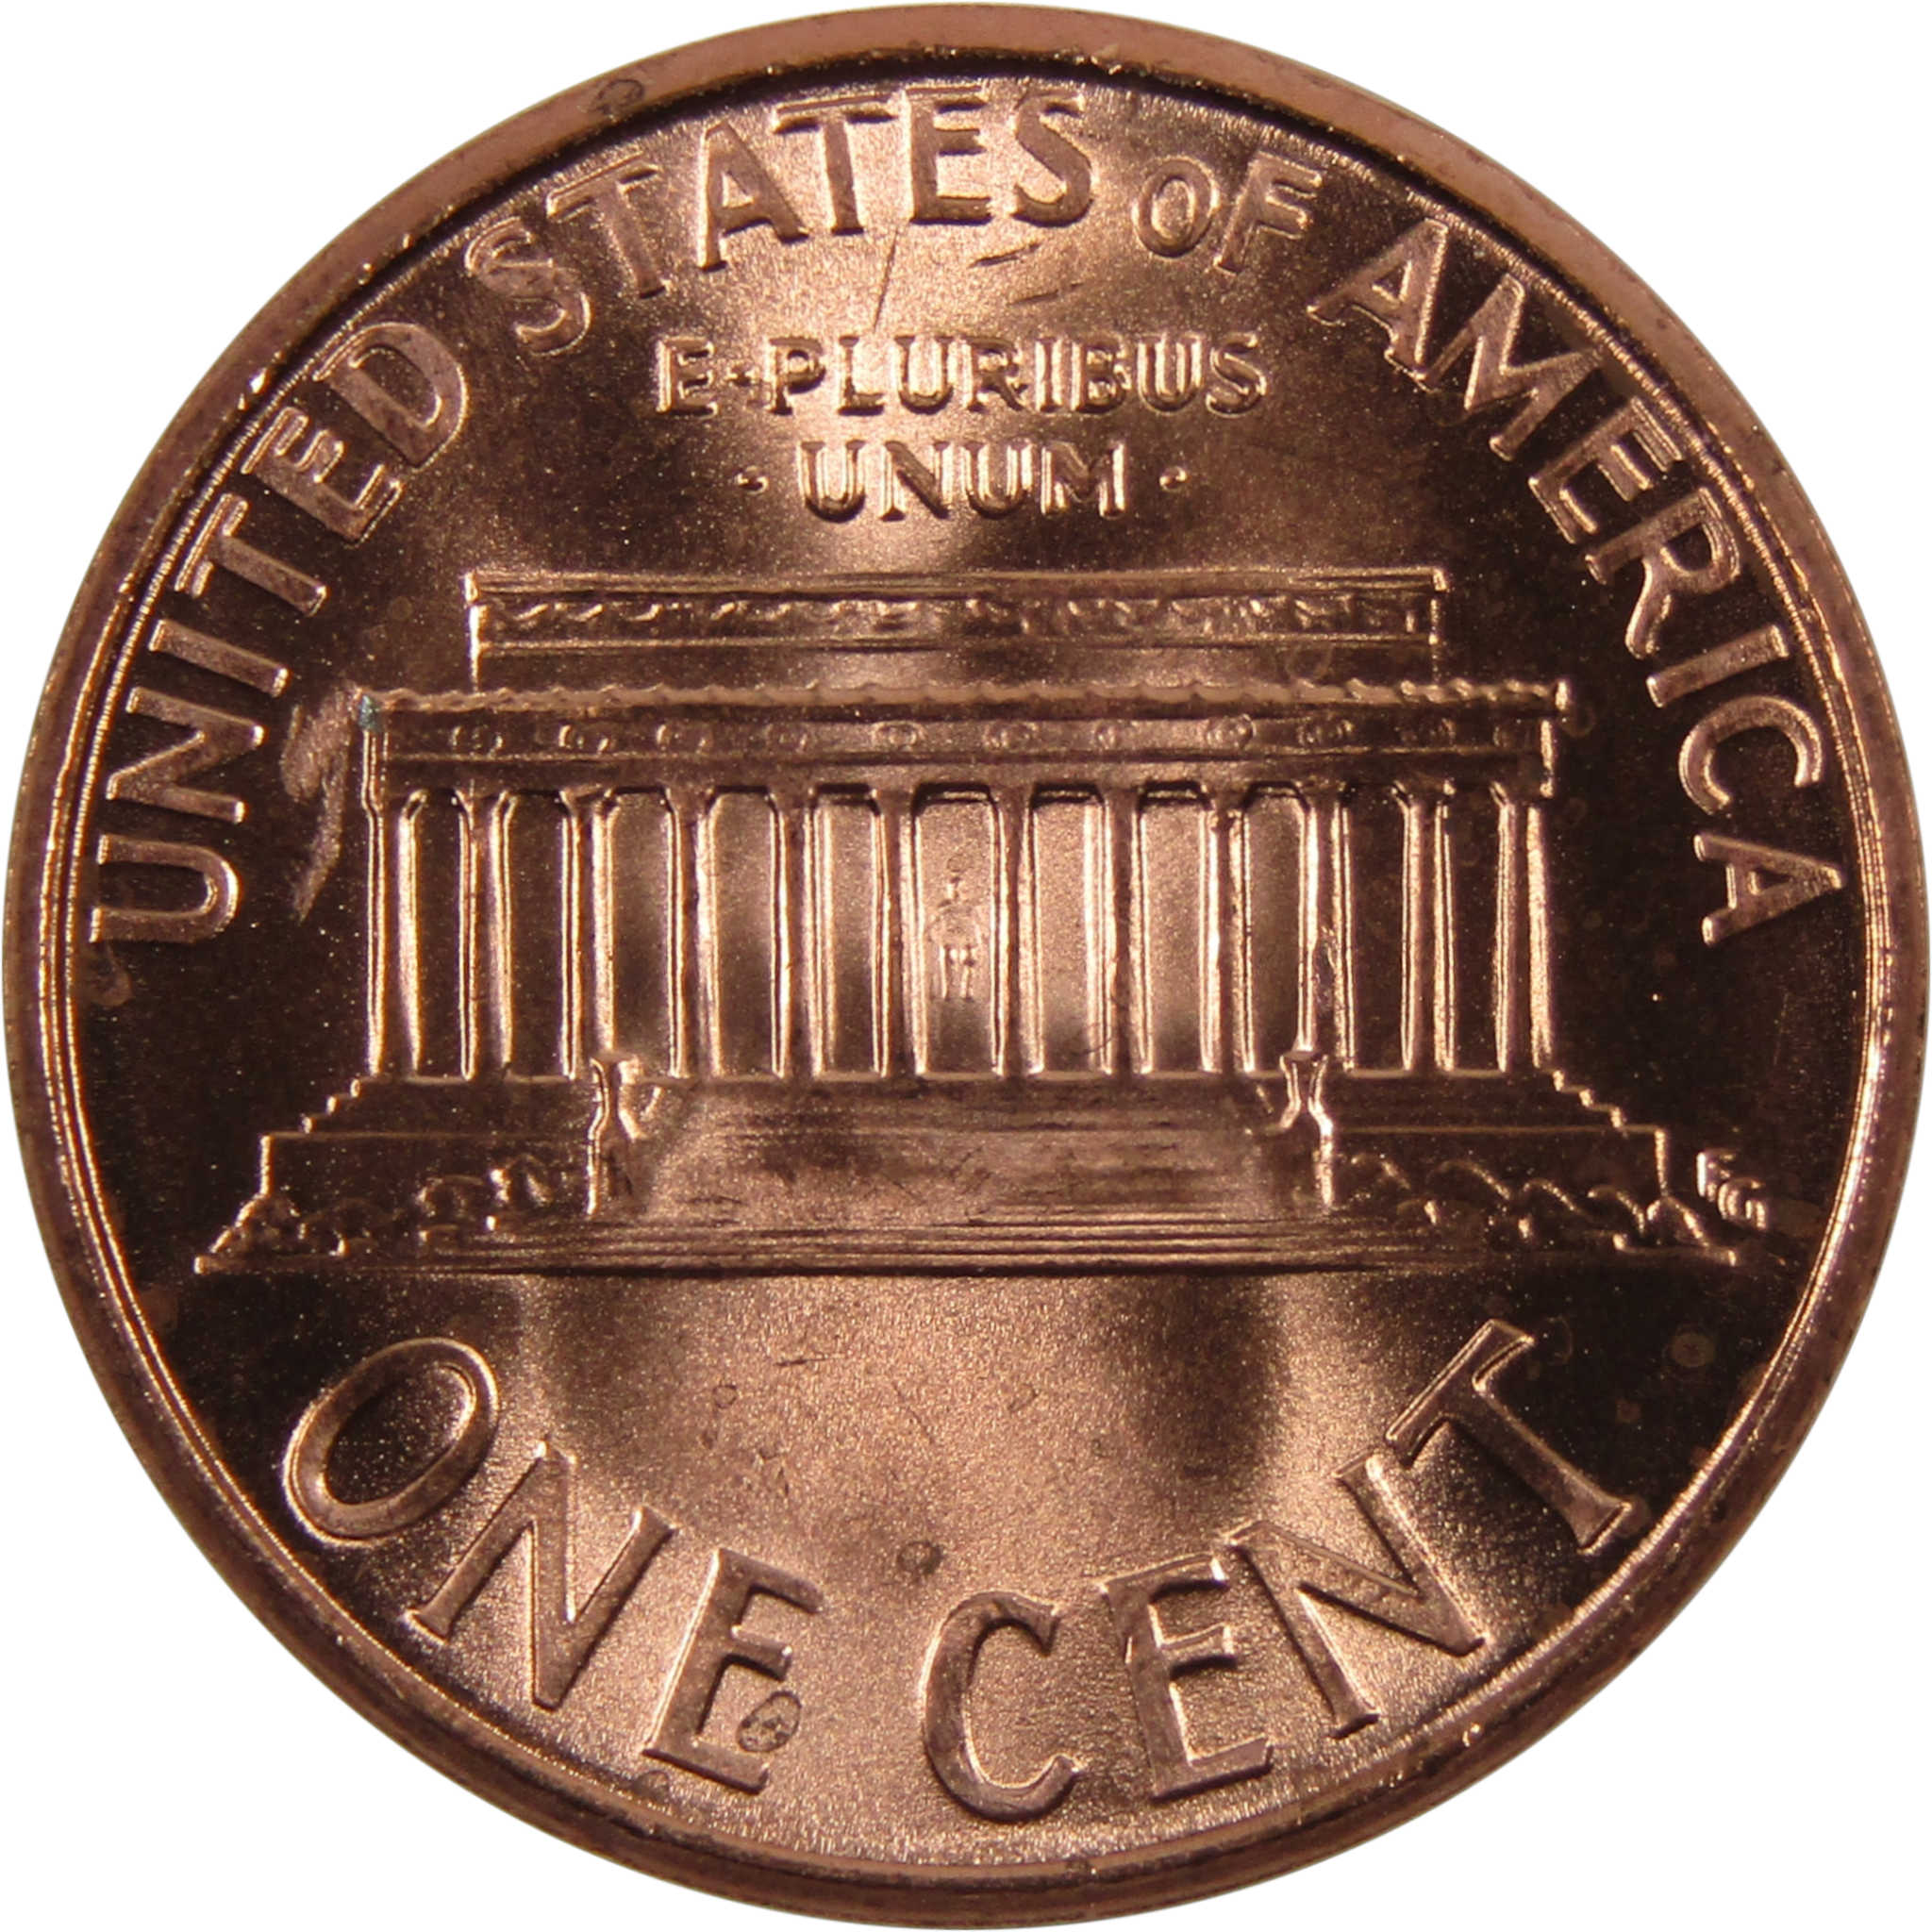 2006 Lincoln Memorial Cent BU Uncirculated Penny 1c Coin